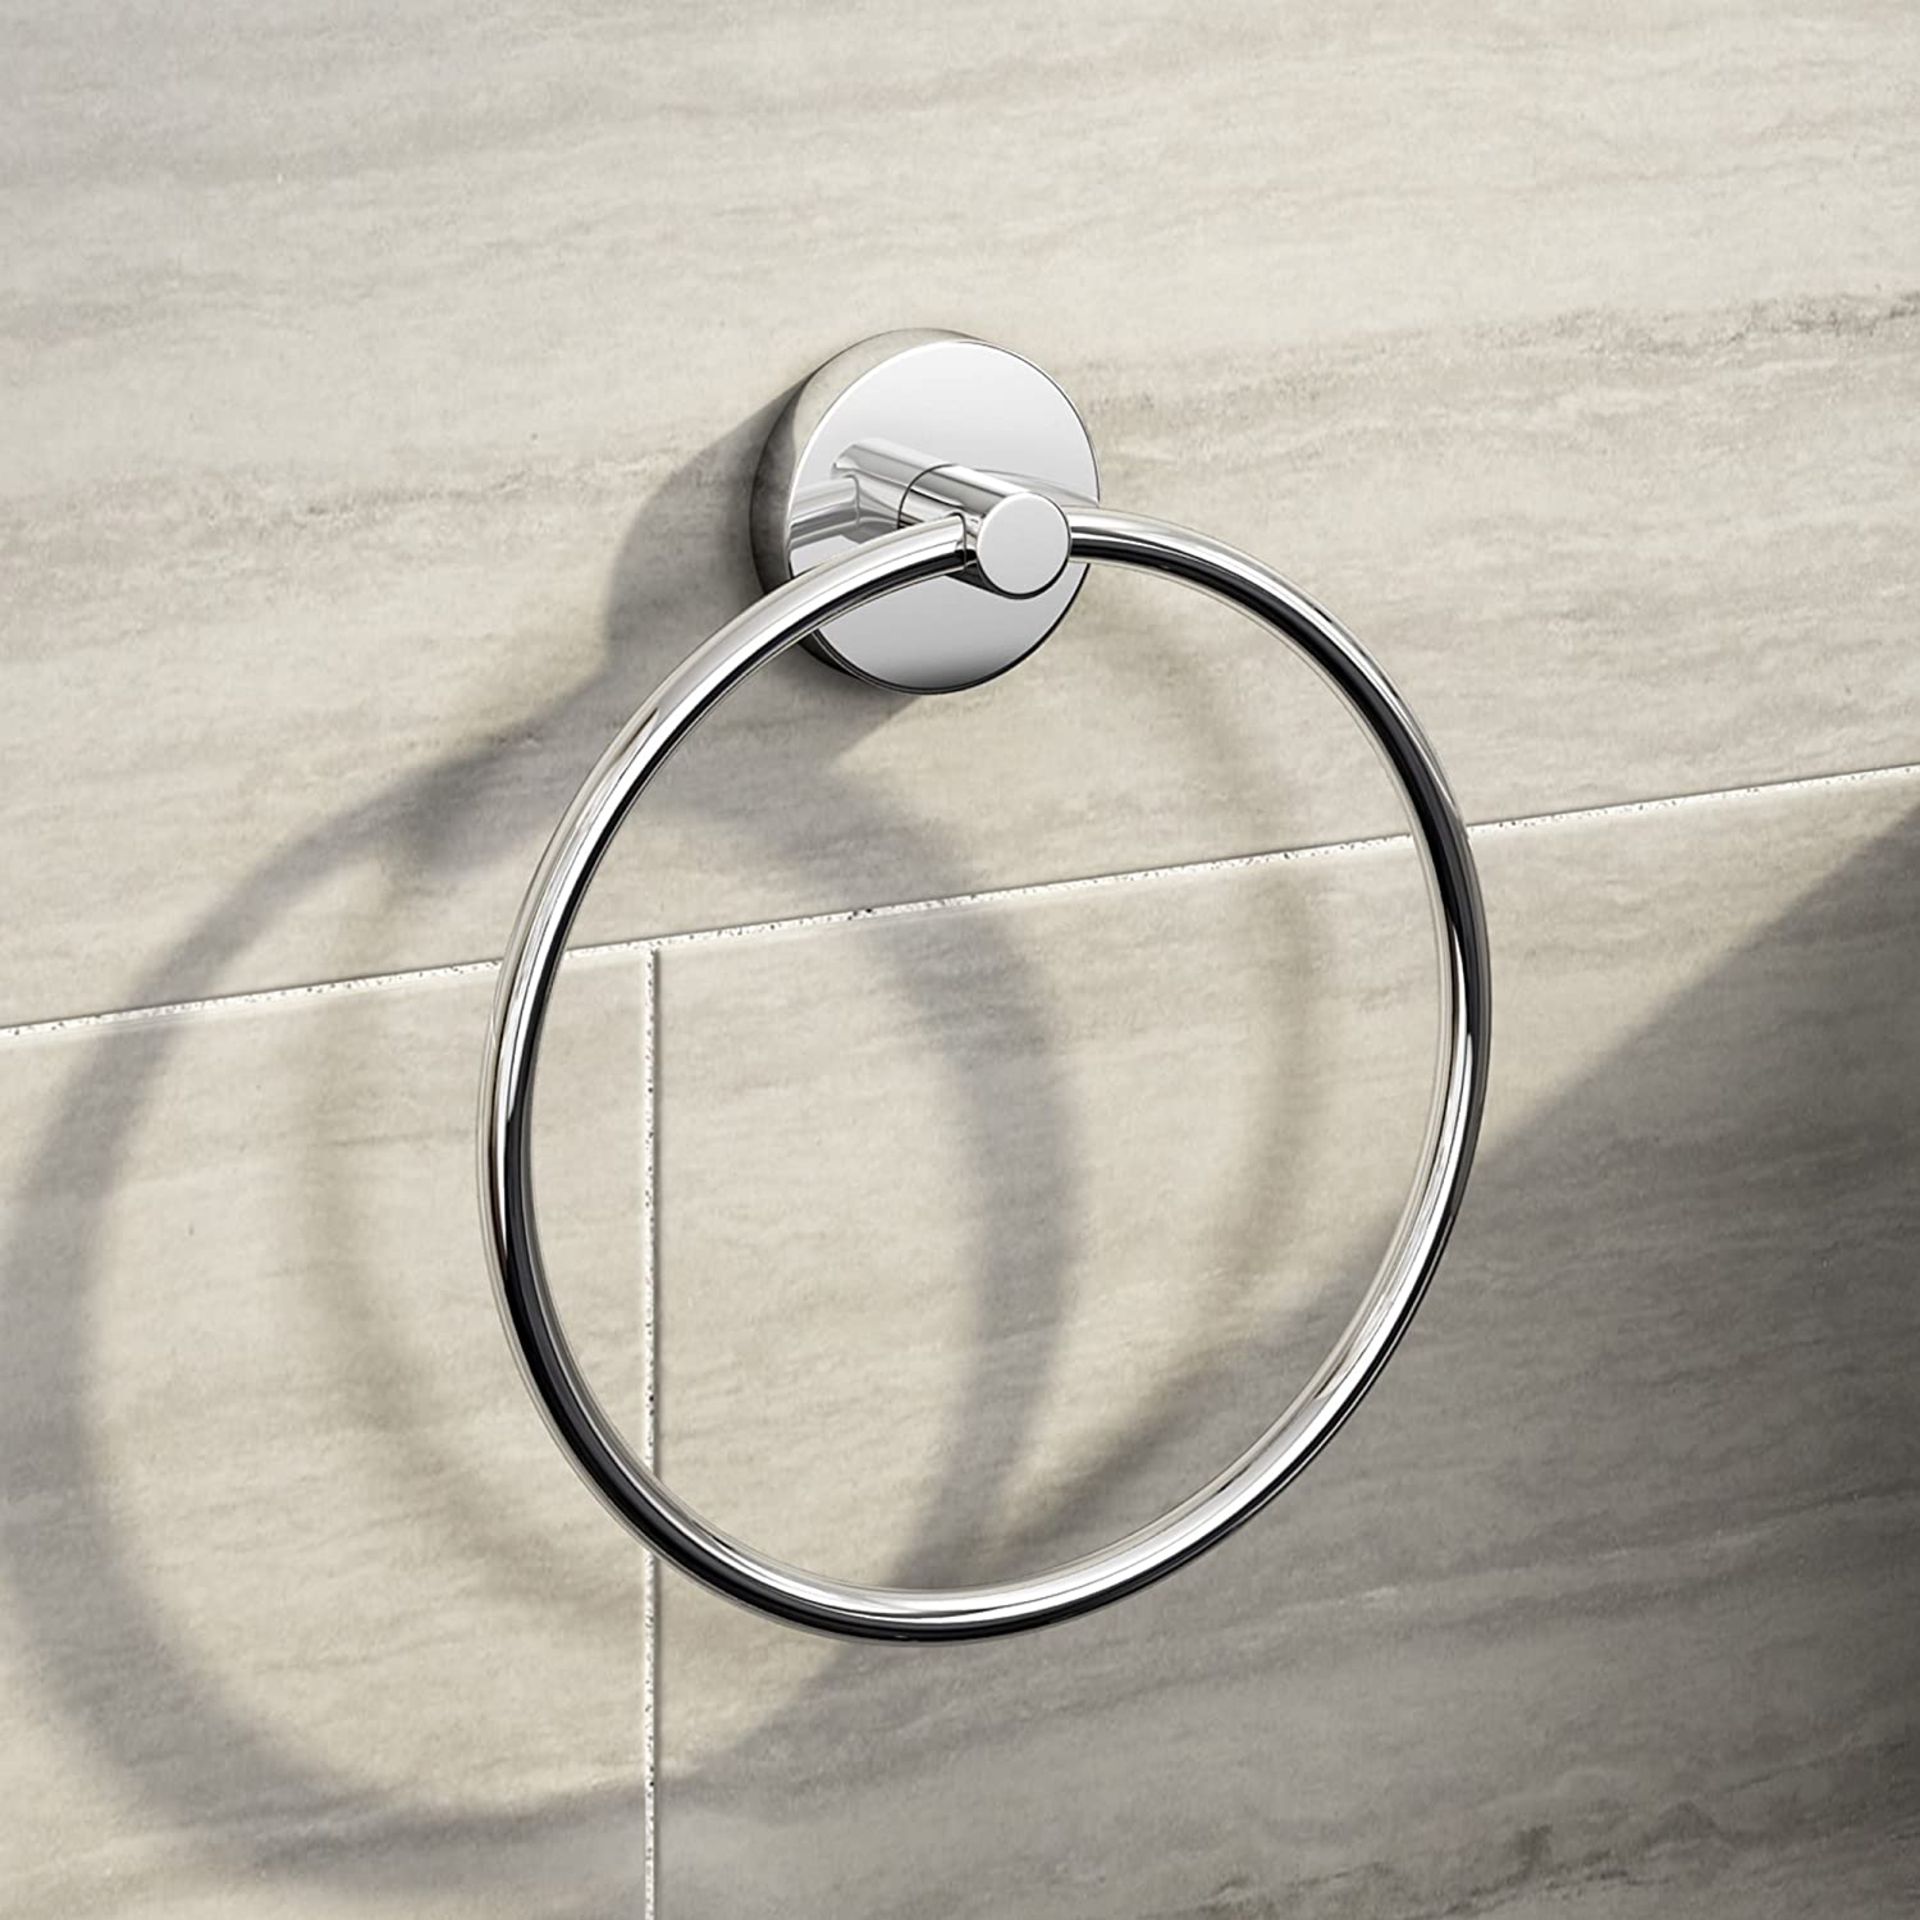 (MG1017) Modern Chrome Towel Ring Holder Wall Mounted Round Bathroom Accessory. Gleaming chrome...